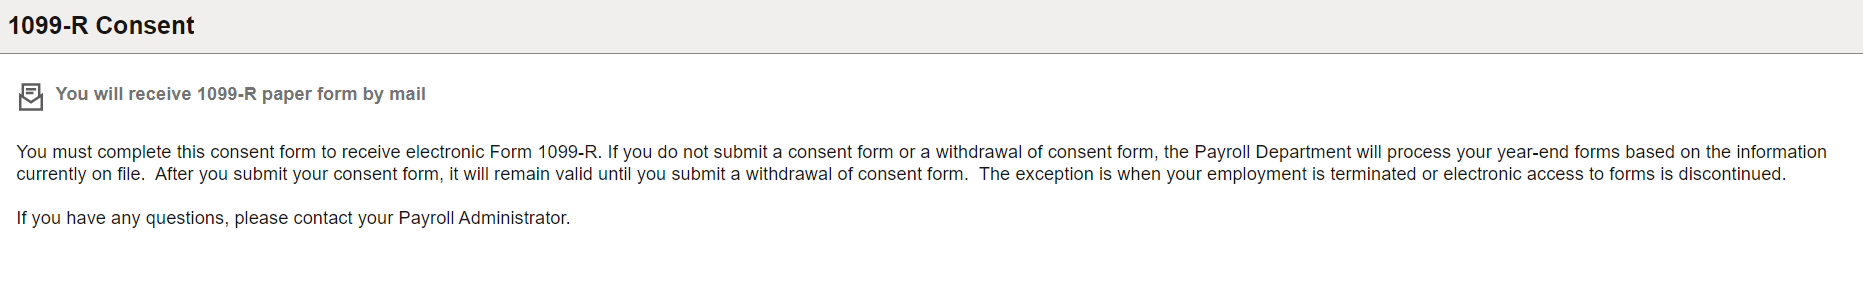 1099-R Consent page (confirmation of submission)